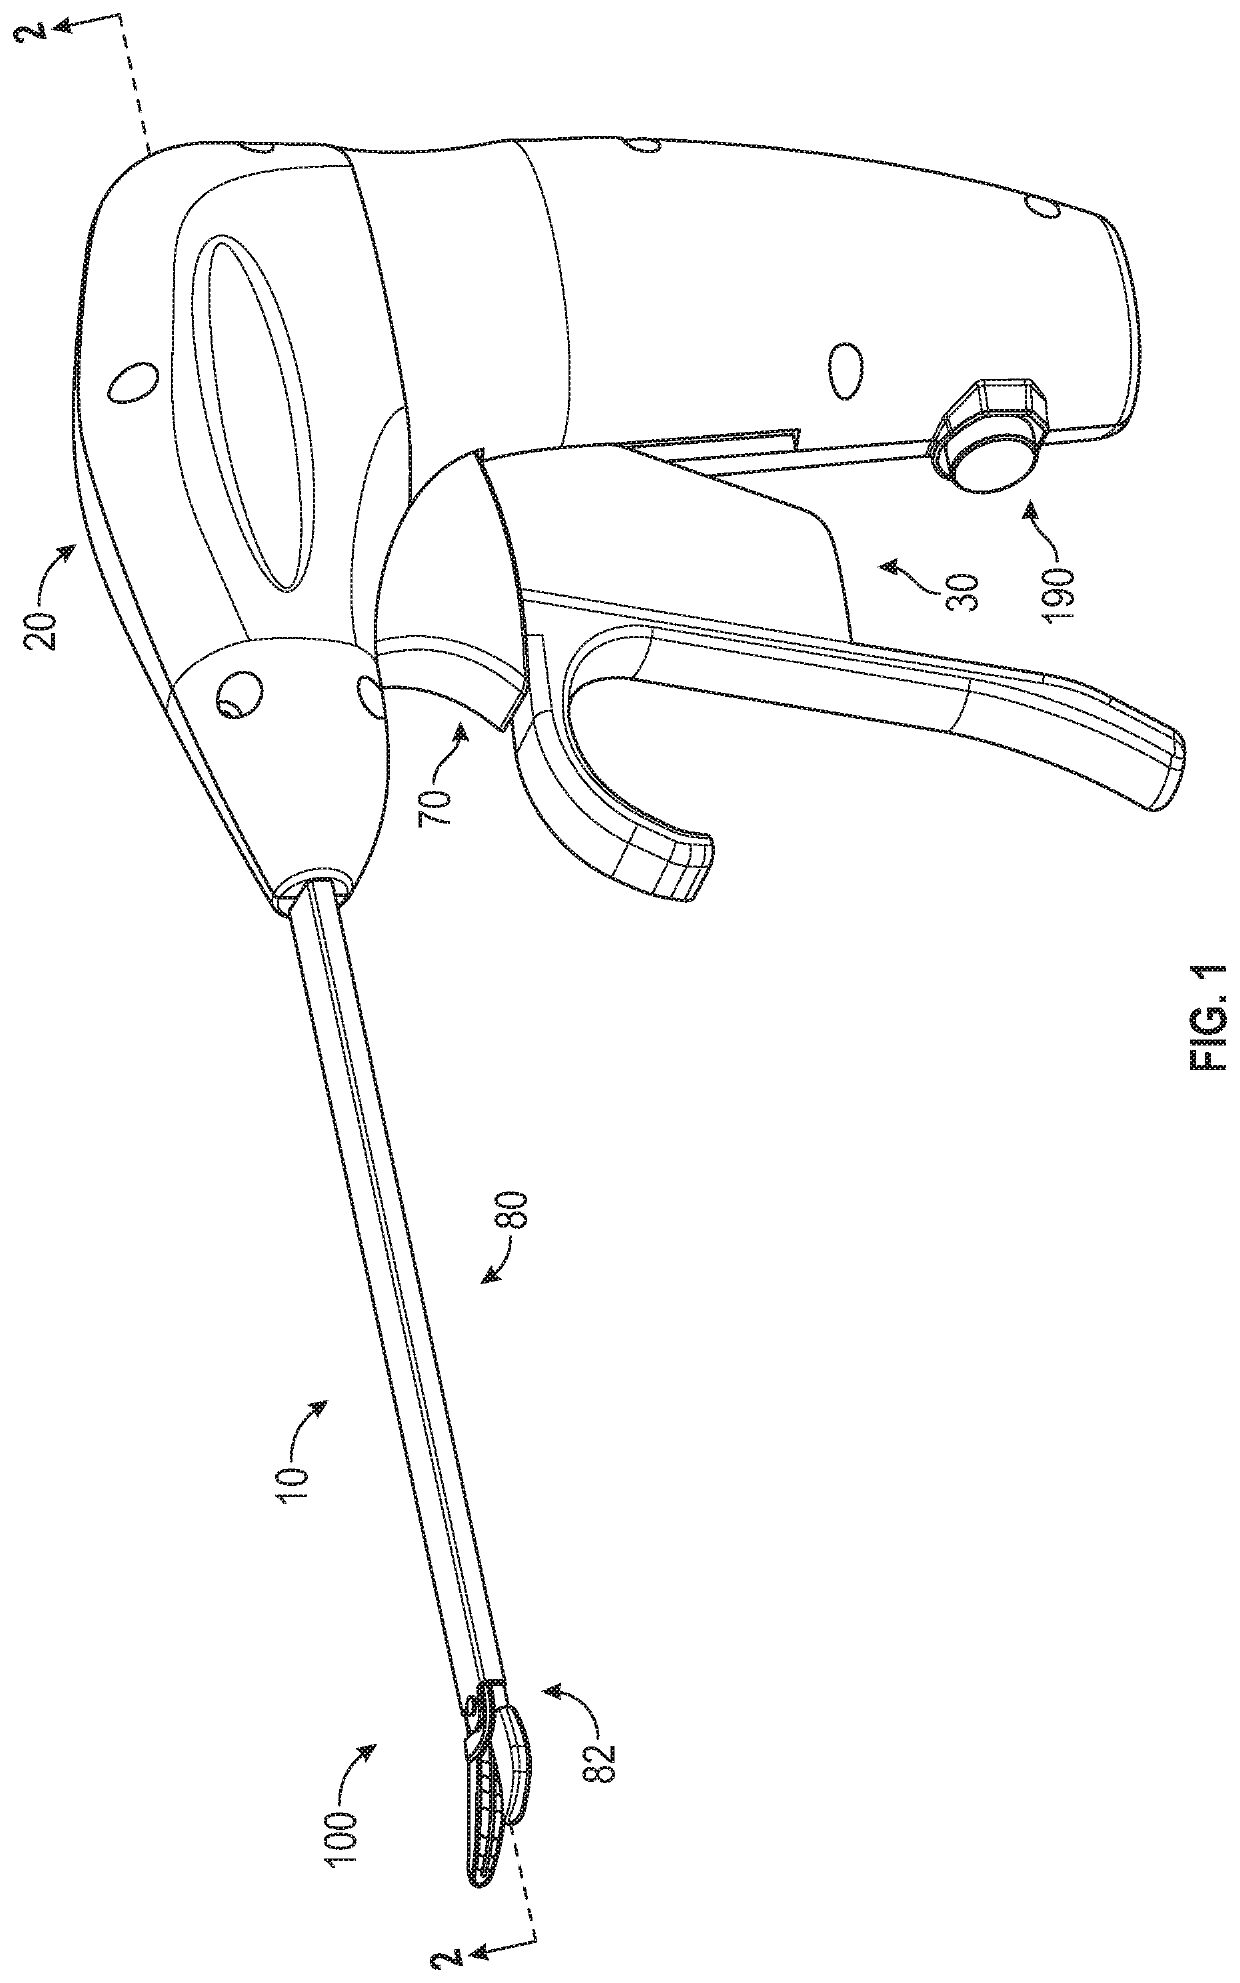 Surgical forceps having jaw members